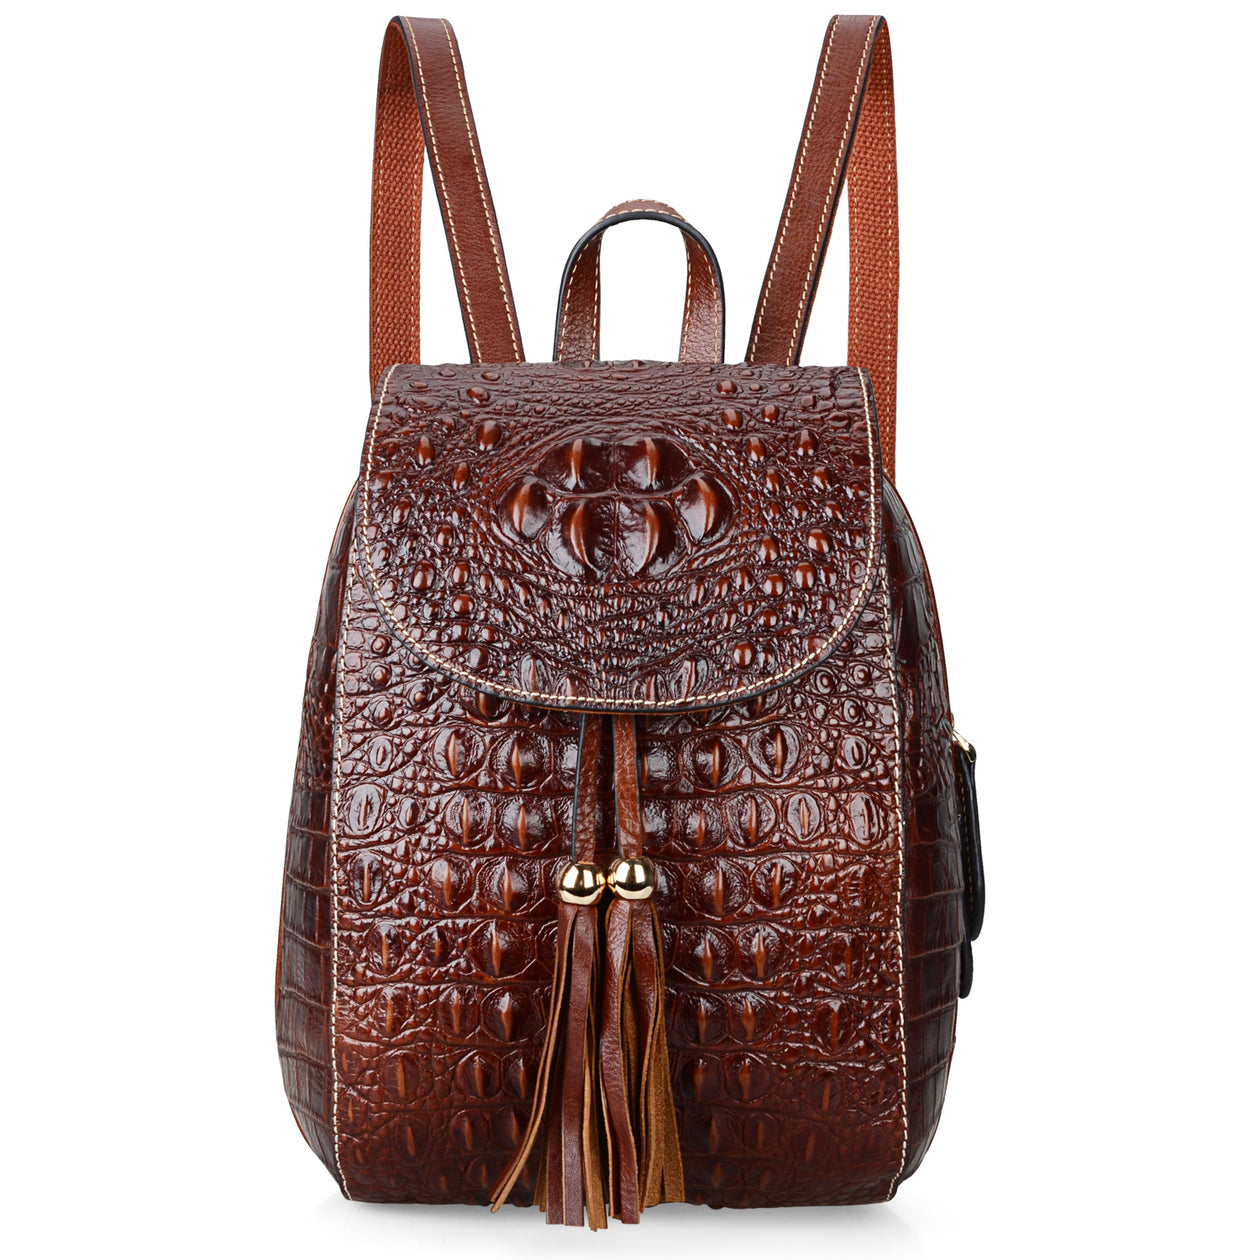 Small Leather Backpack For Women Crocodile Bags Designer Purses – PIJUSHI